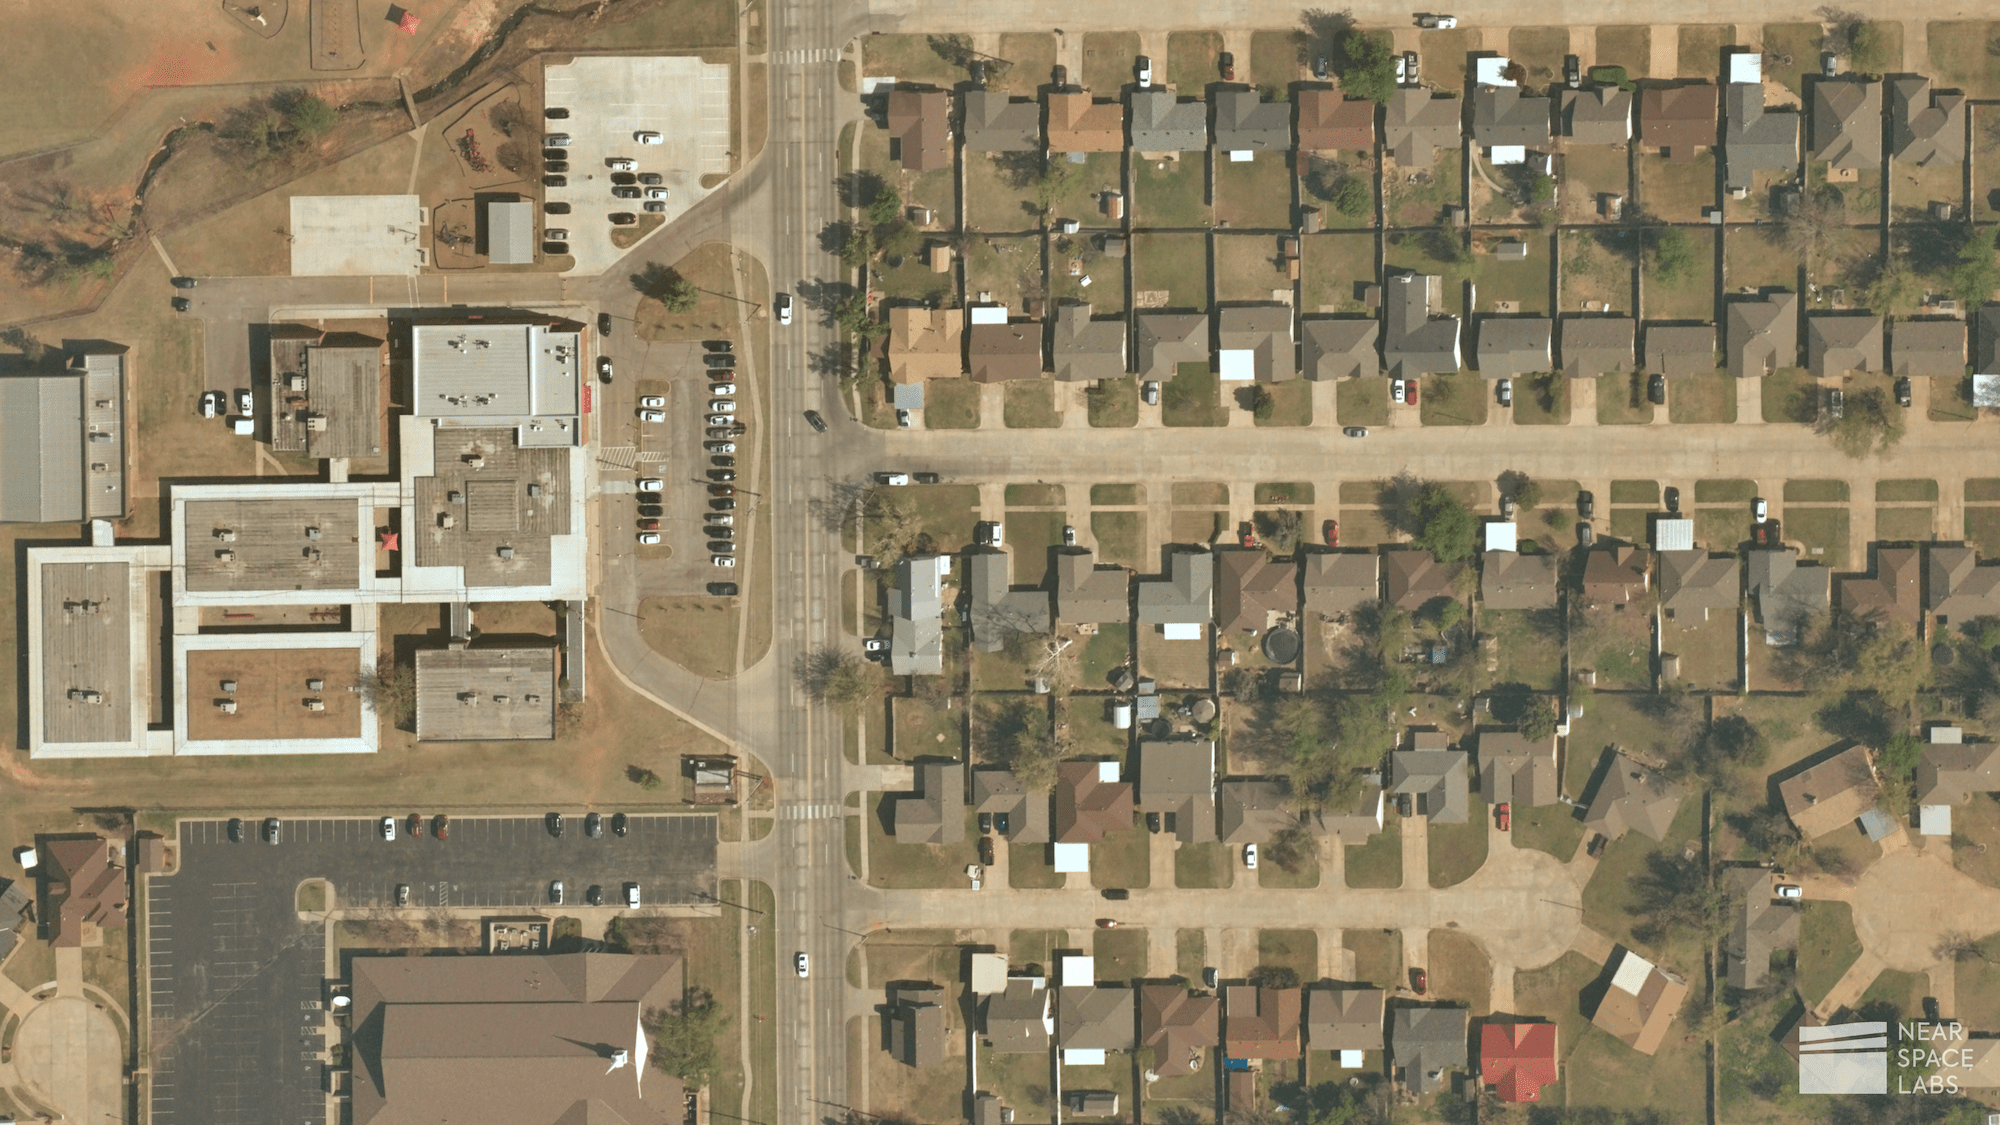 Near Space Labs capture of suburbs in Oklahoma.